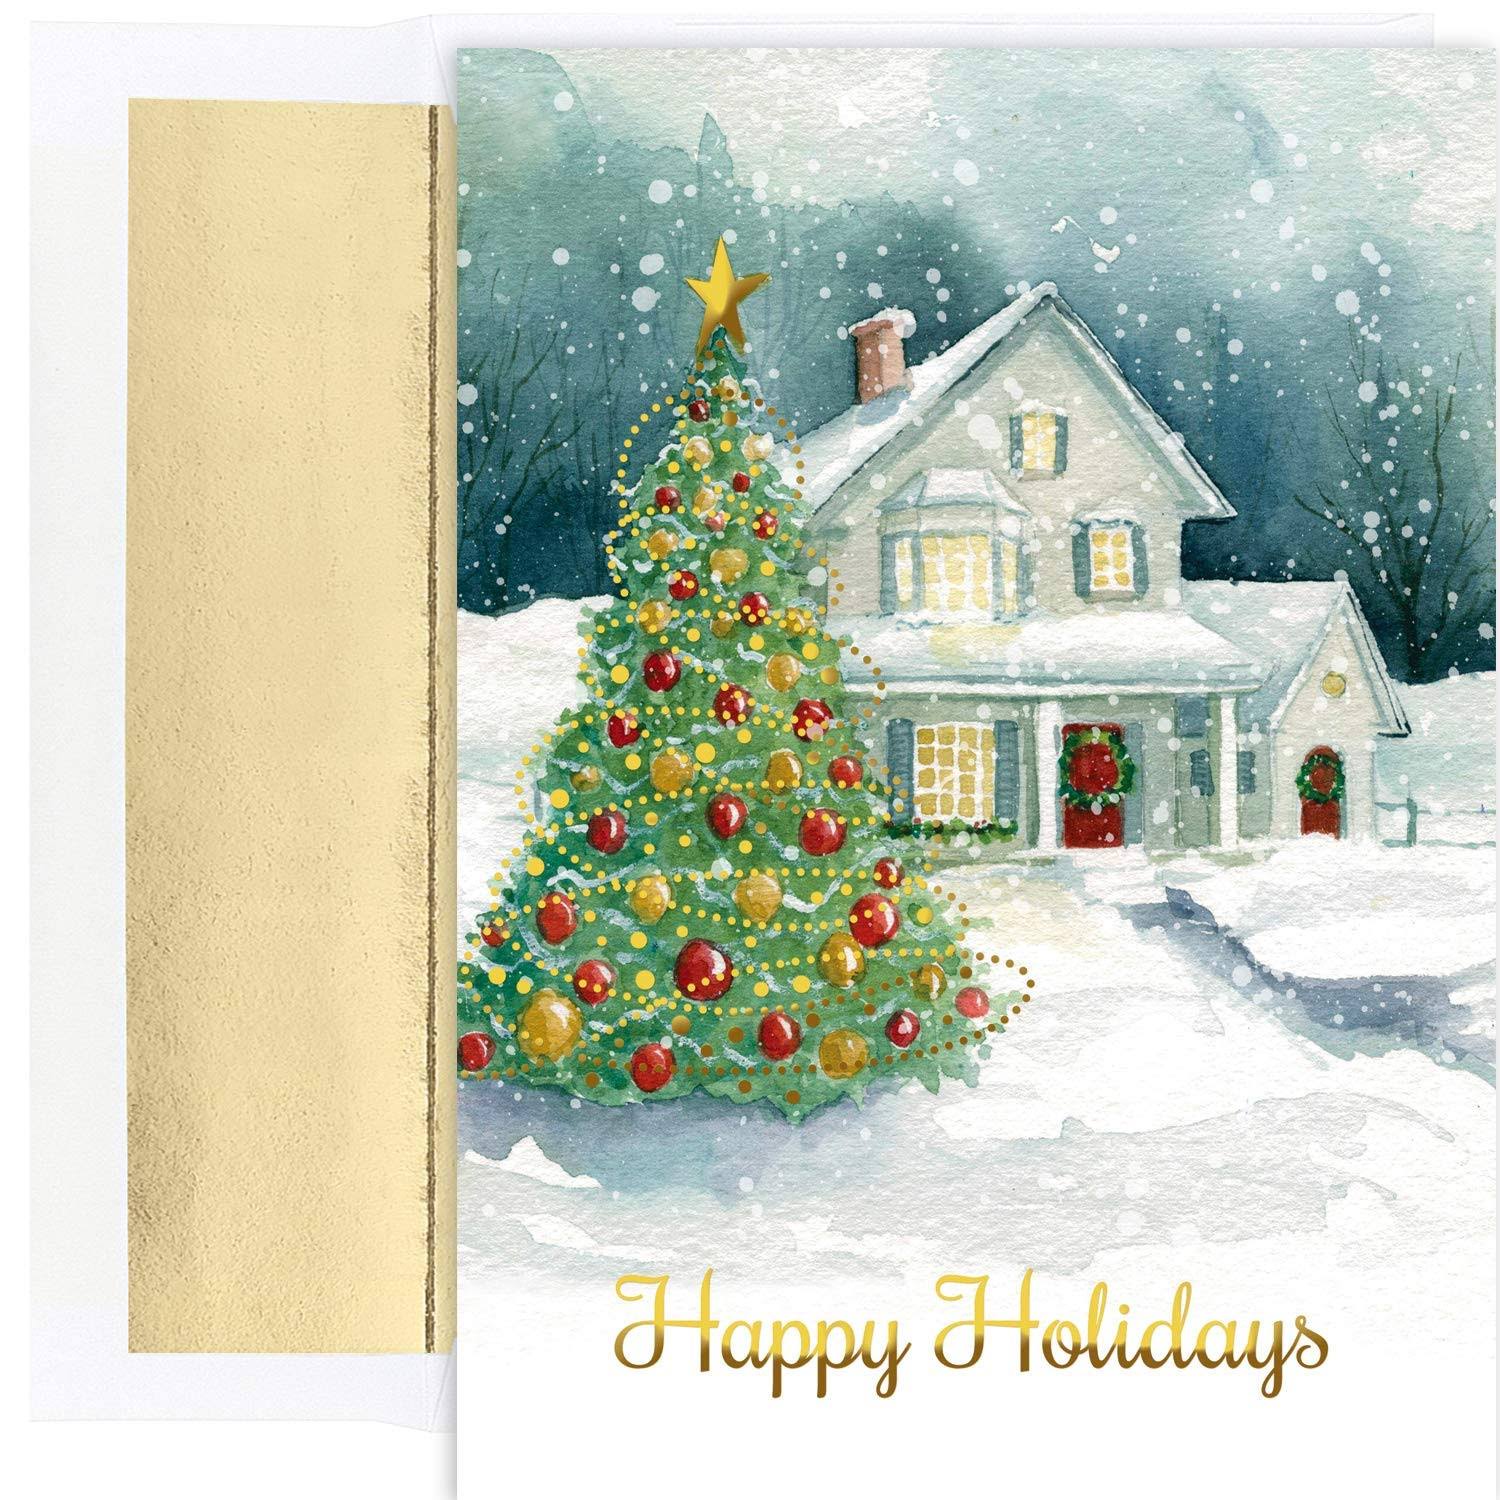 Masterpiece Studios Holiday Collection 18 Cards / 18 Foil Lined Envelopes, Winter Cottage | General | Delivery Guaranteed